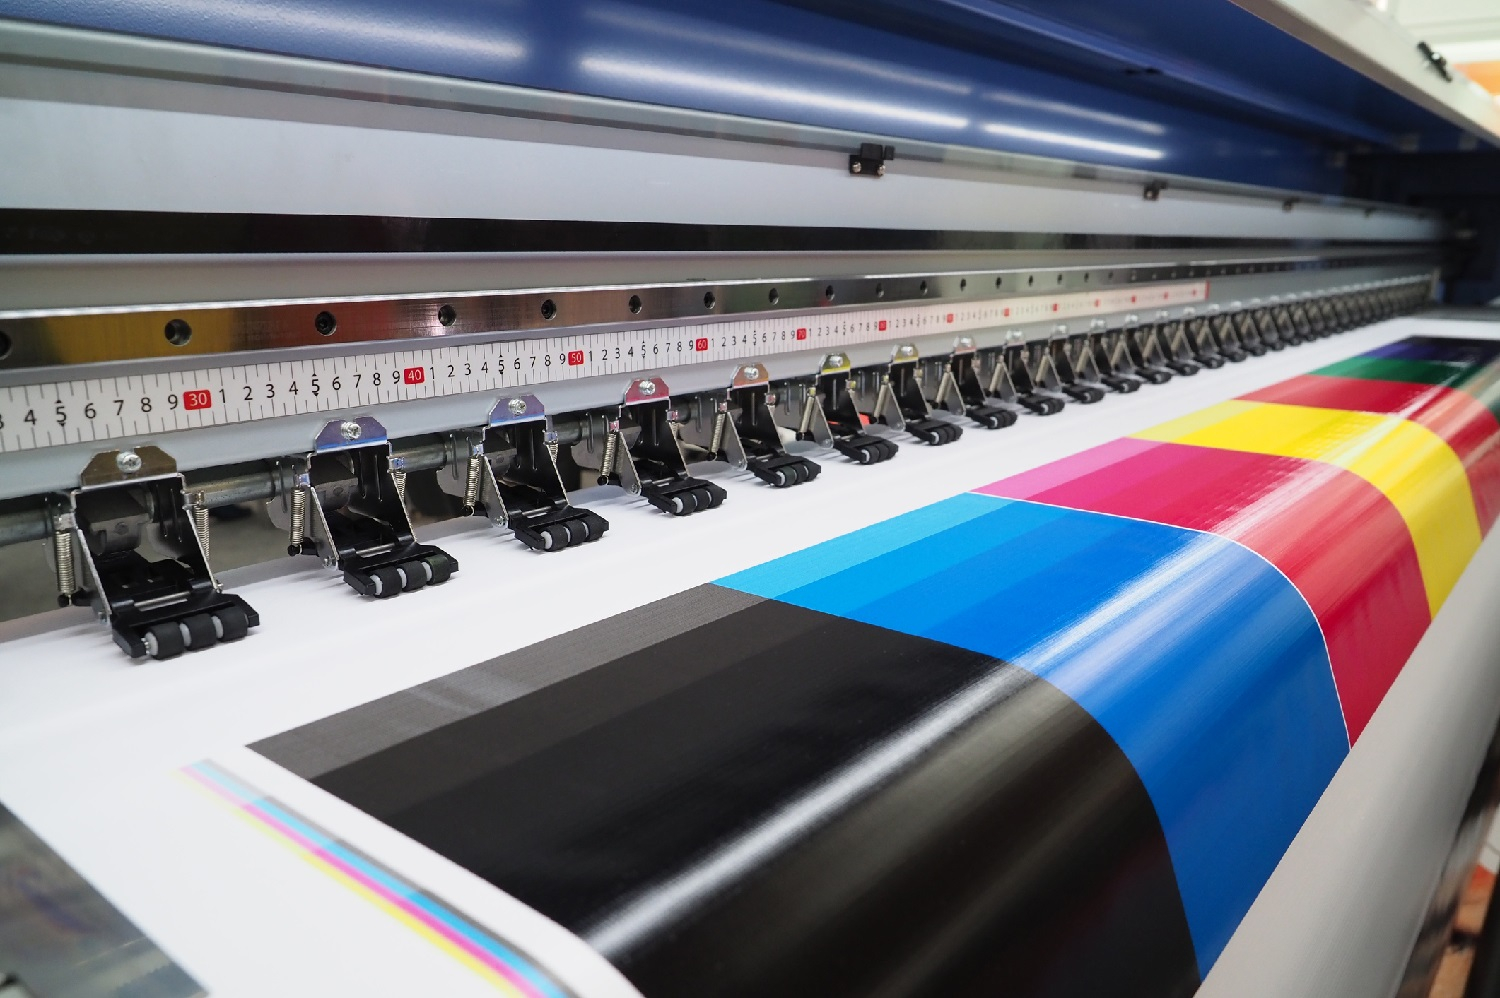 A wide-format printer at work. Image from the Business blog.